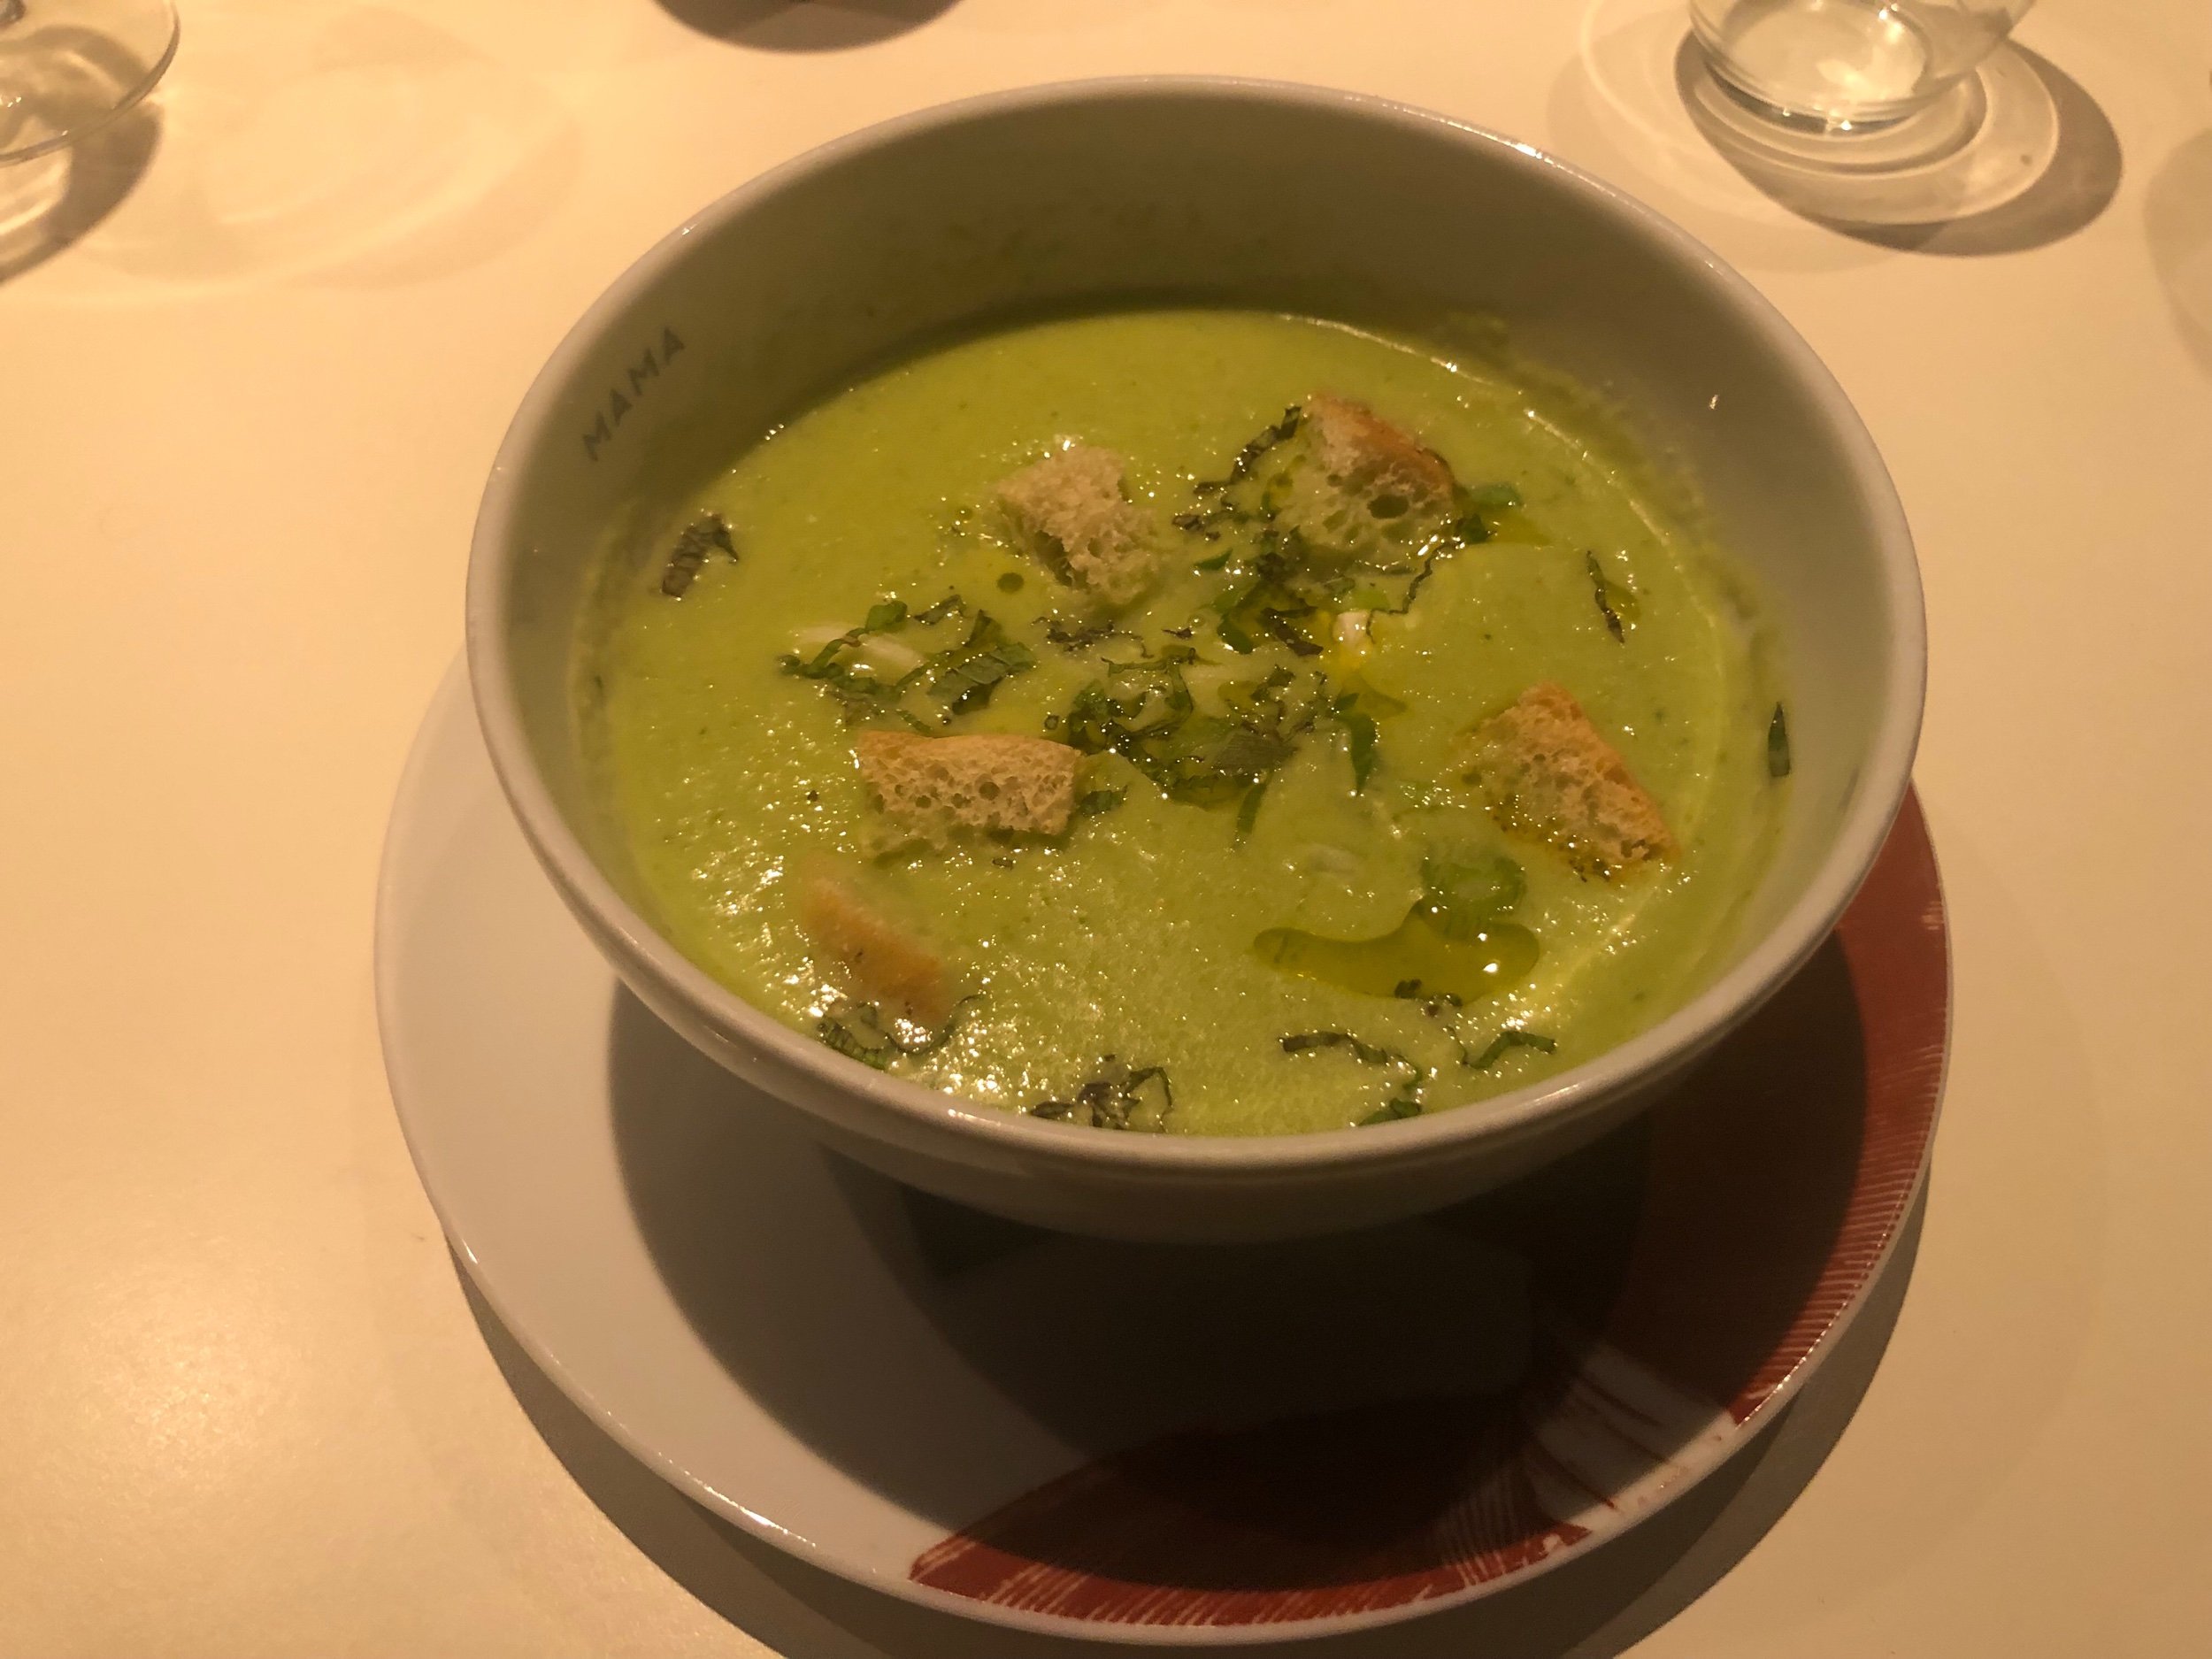  My first time trying green gazpacho - it was quite good! 